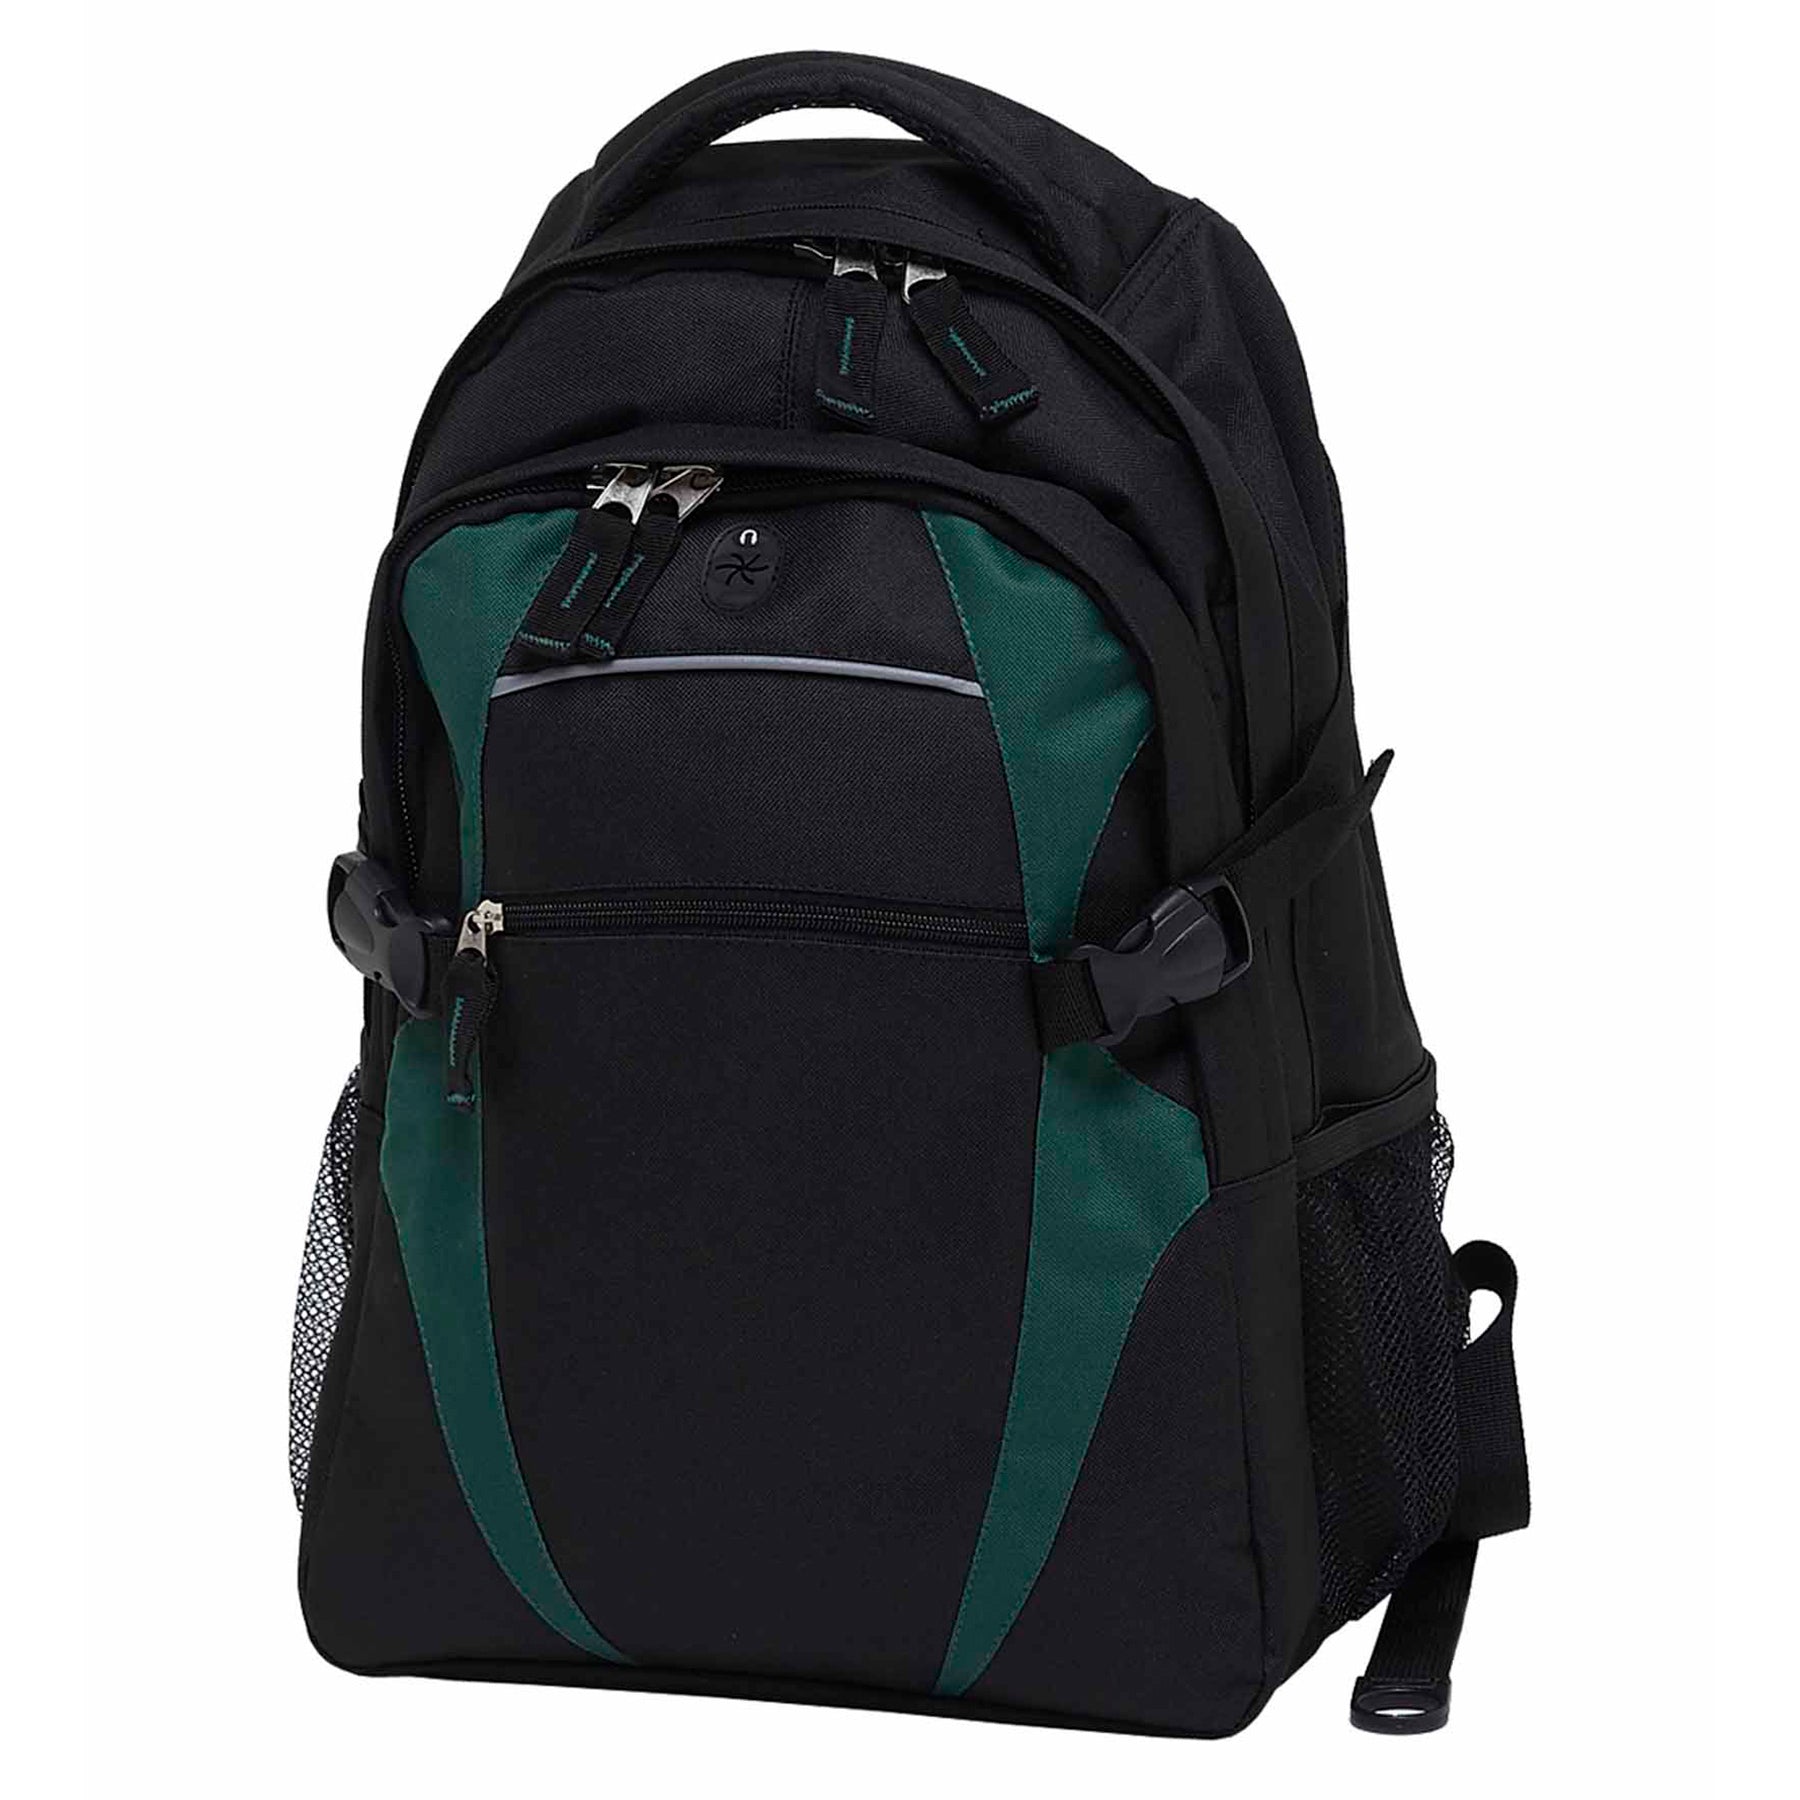 The Spliced Zenith Backpack